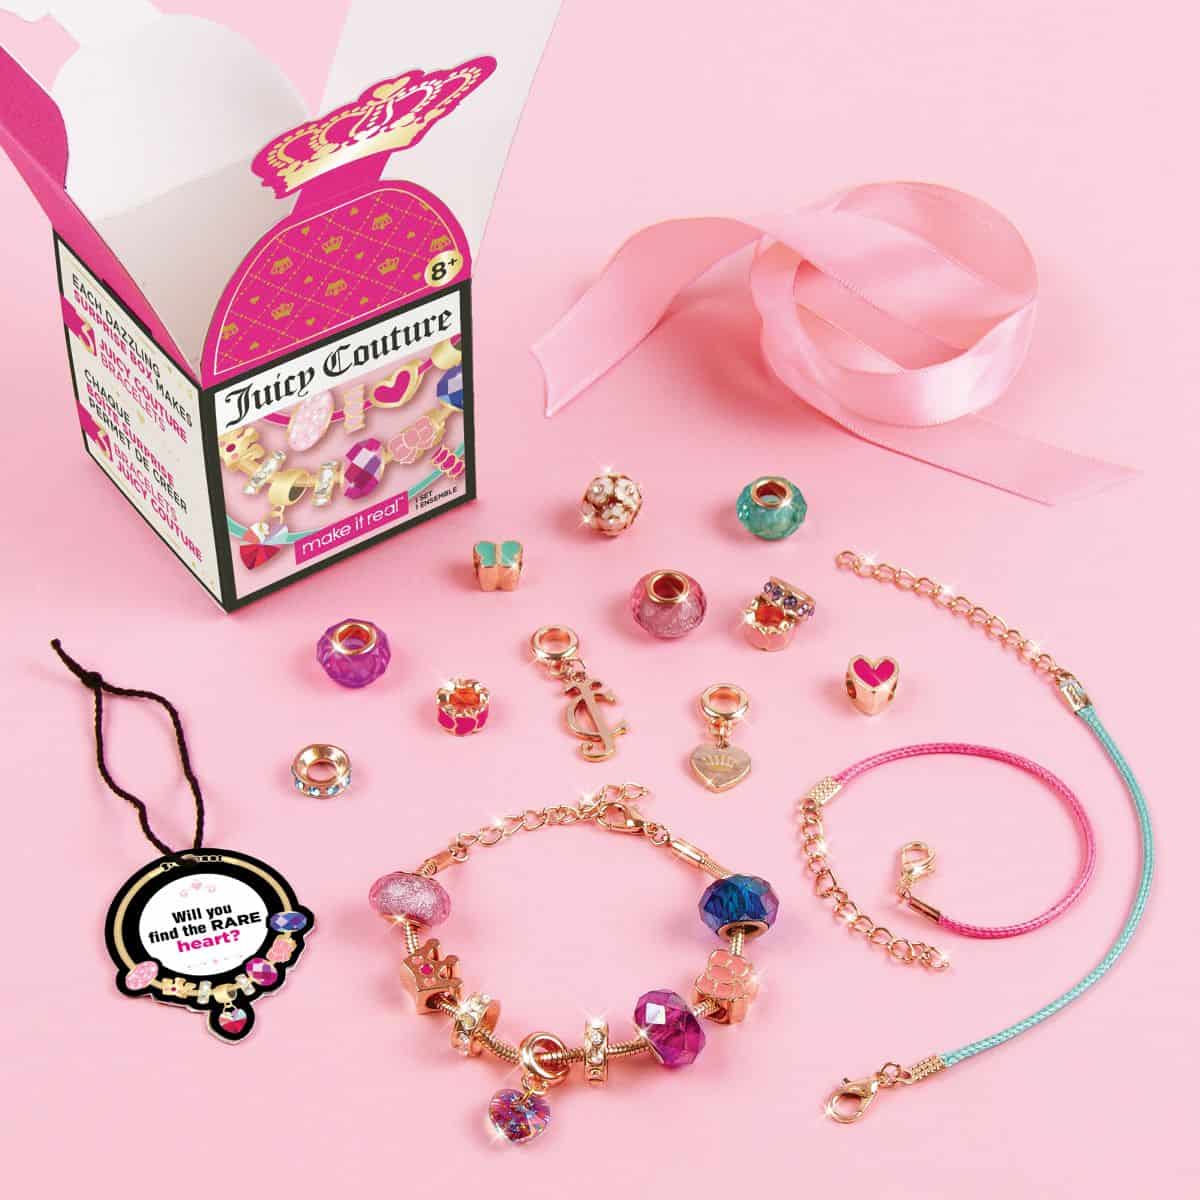 Make It Real - Juicy Couture Dazzling DIY Surprise Box